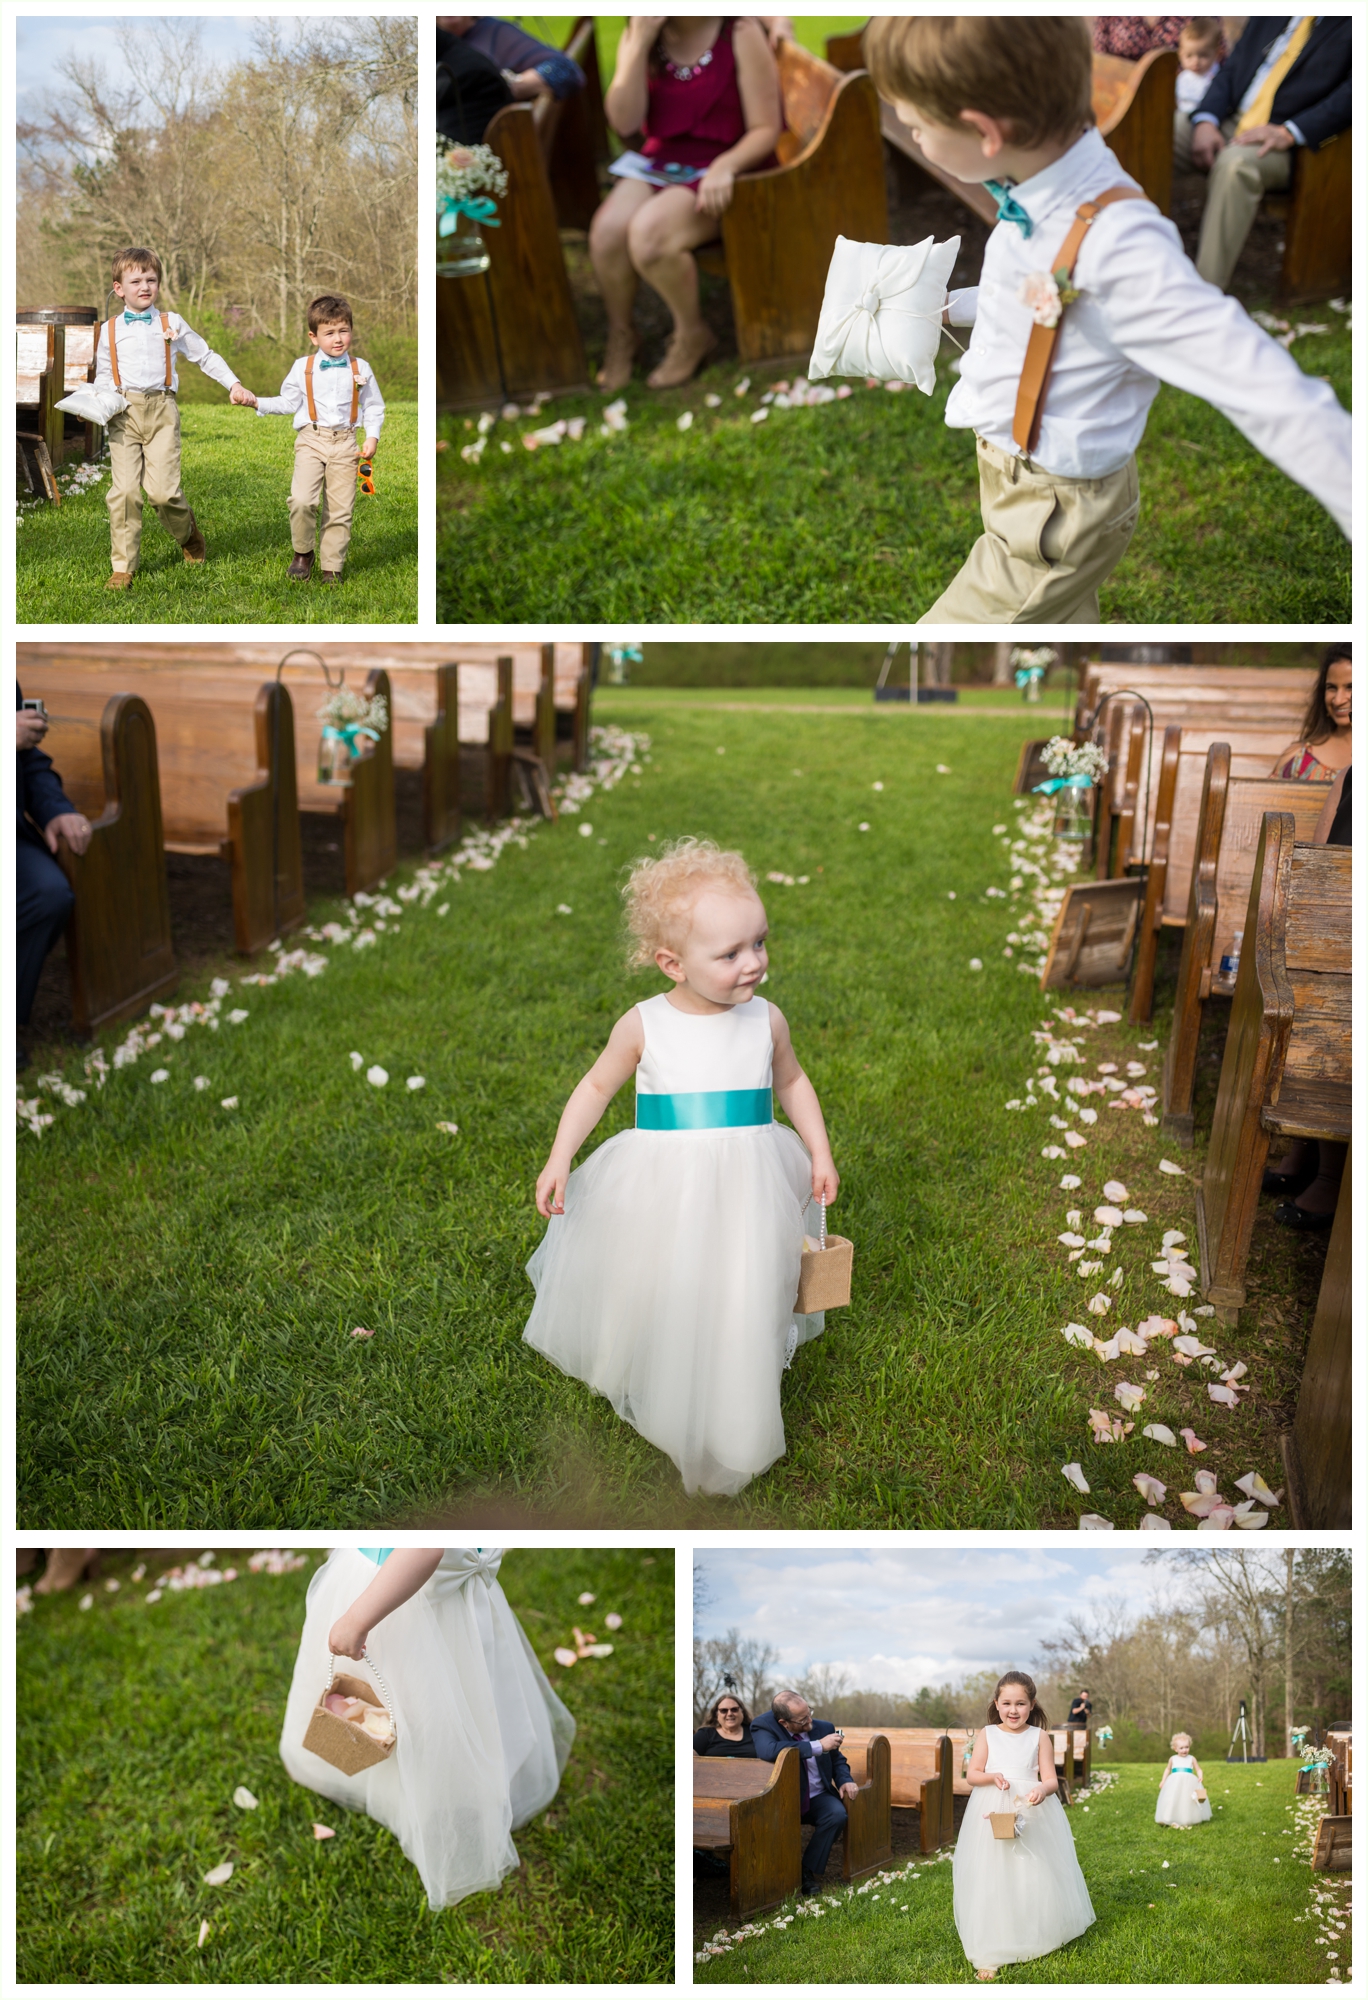 flower girl and ring bearers walking down the aisle during wedding ceremony